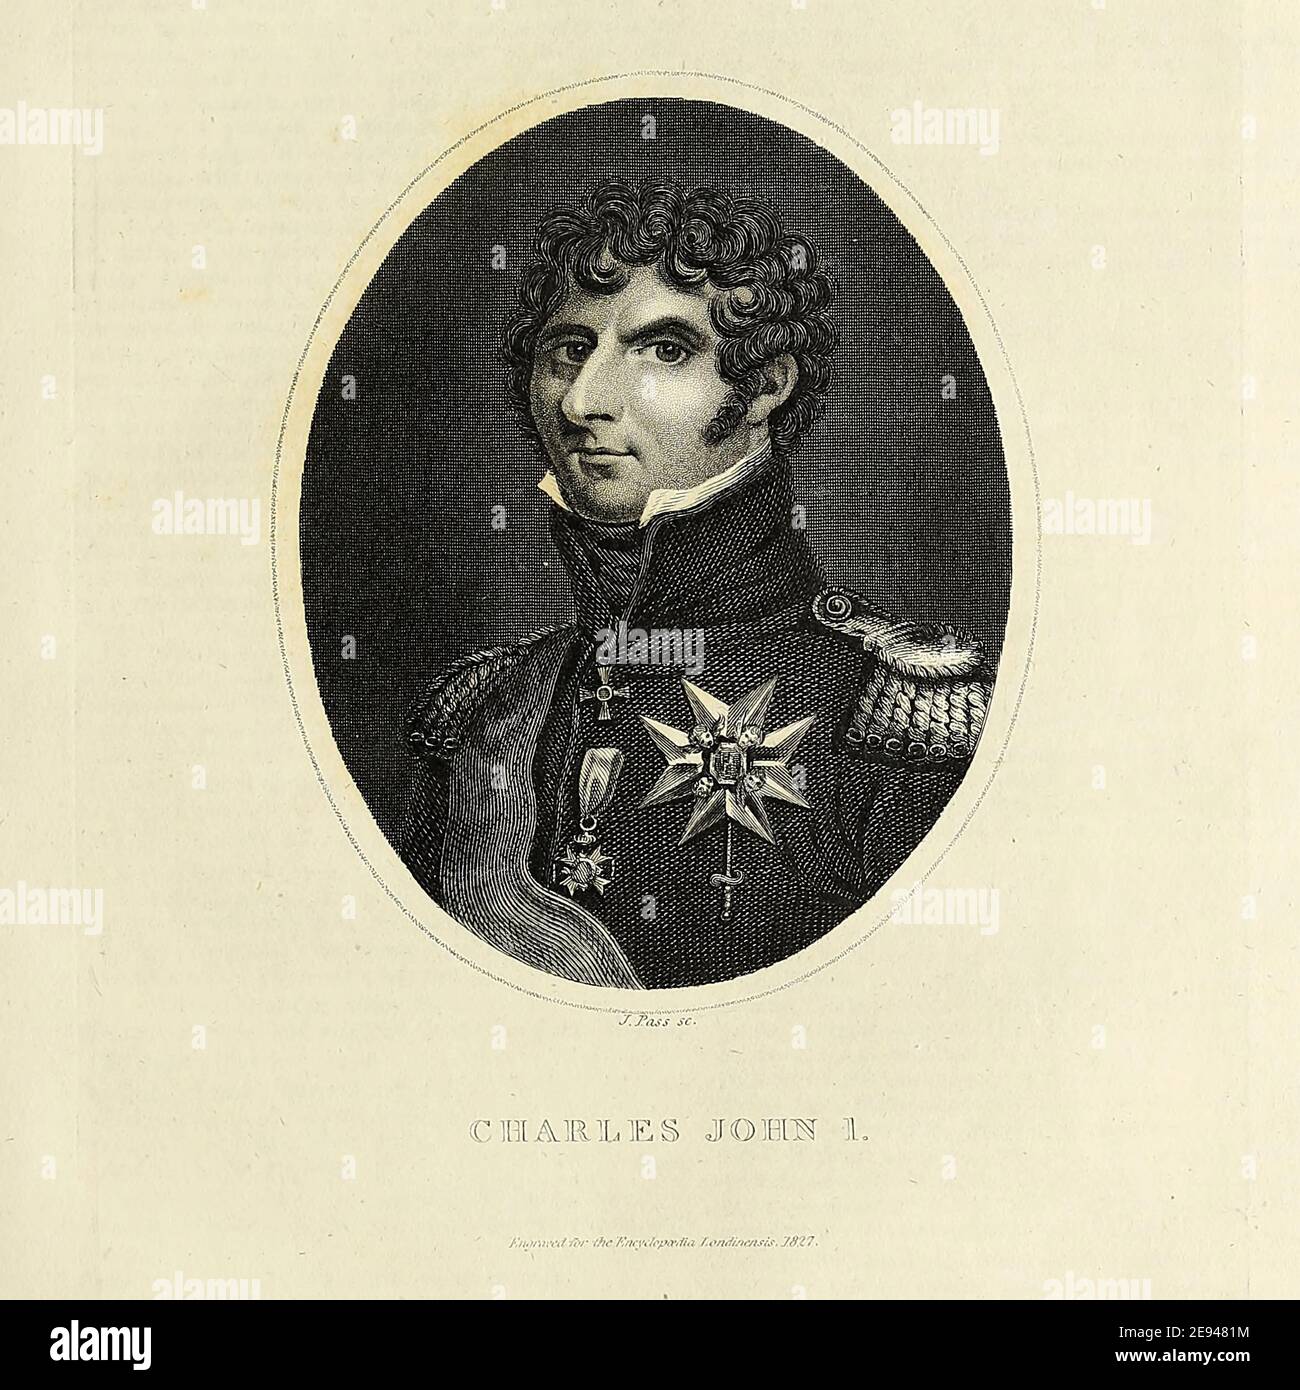 Charles XIV John (Karl XIV Johan; born Jean Bernadotte; 26 January 1763 – 8 March 1844) was King of Sweden and Norway from 1818 until his death. In modern Norwegian lists of kings he is called Charles III John. He was the first monarch of the Bernadotte dynasty. Copperplate engraving From the Encyclopaedia Londinensis or, Universal dictionary of arts, sciences, and literature; Volume XXIII;  Edited by Wilkes, John. Published in London in 1828 Stock Photo